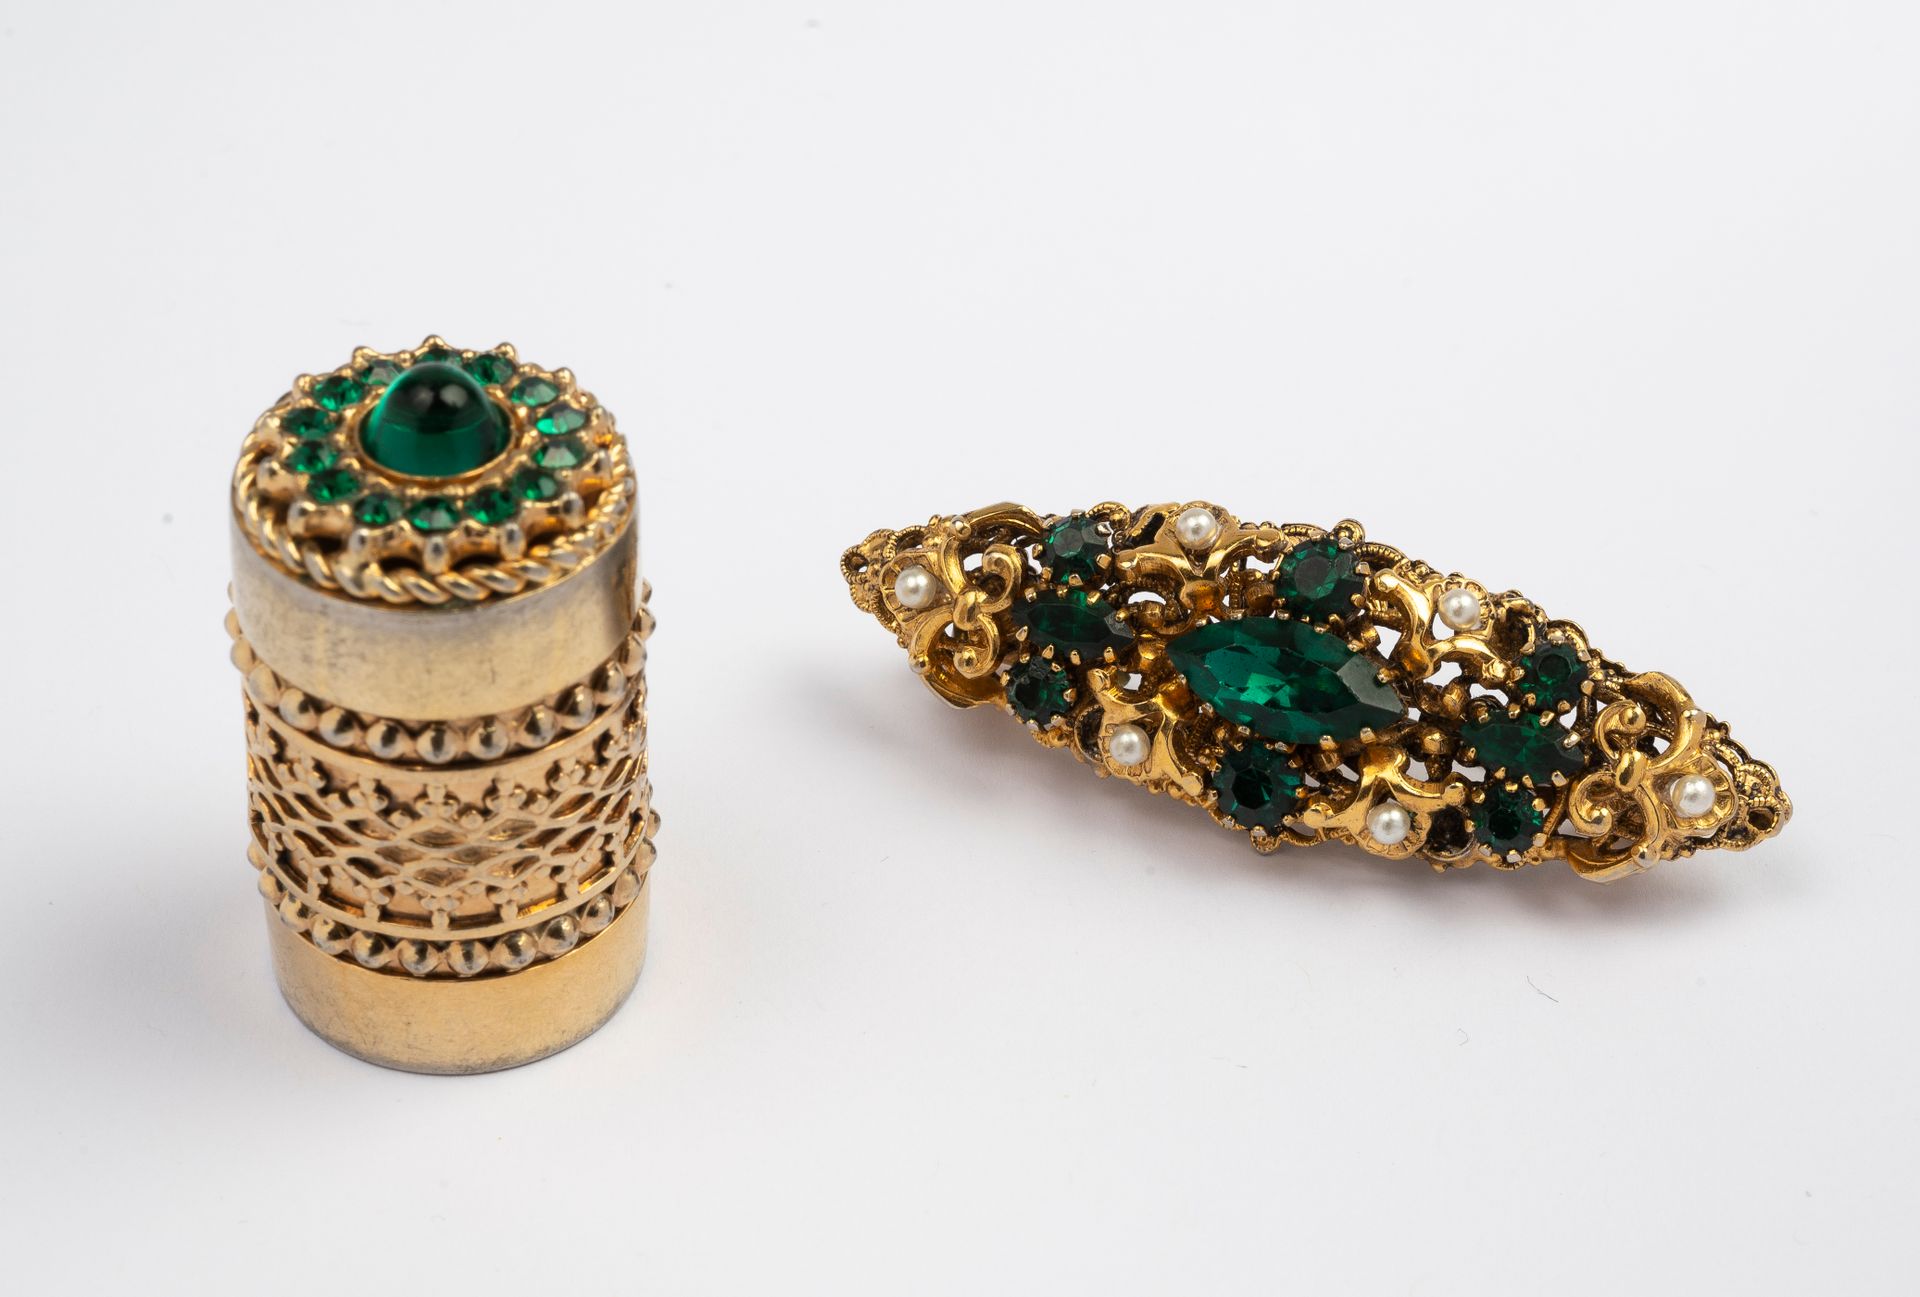 Null A box and a brooch with a foliage pattern enhanced with green stones